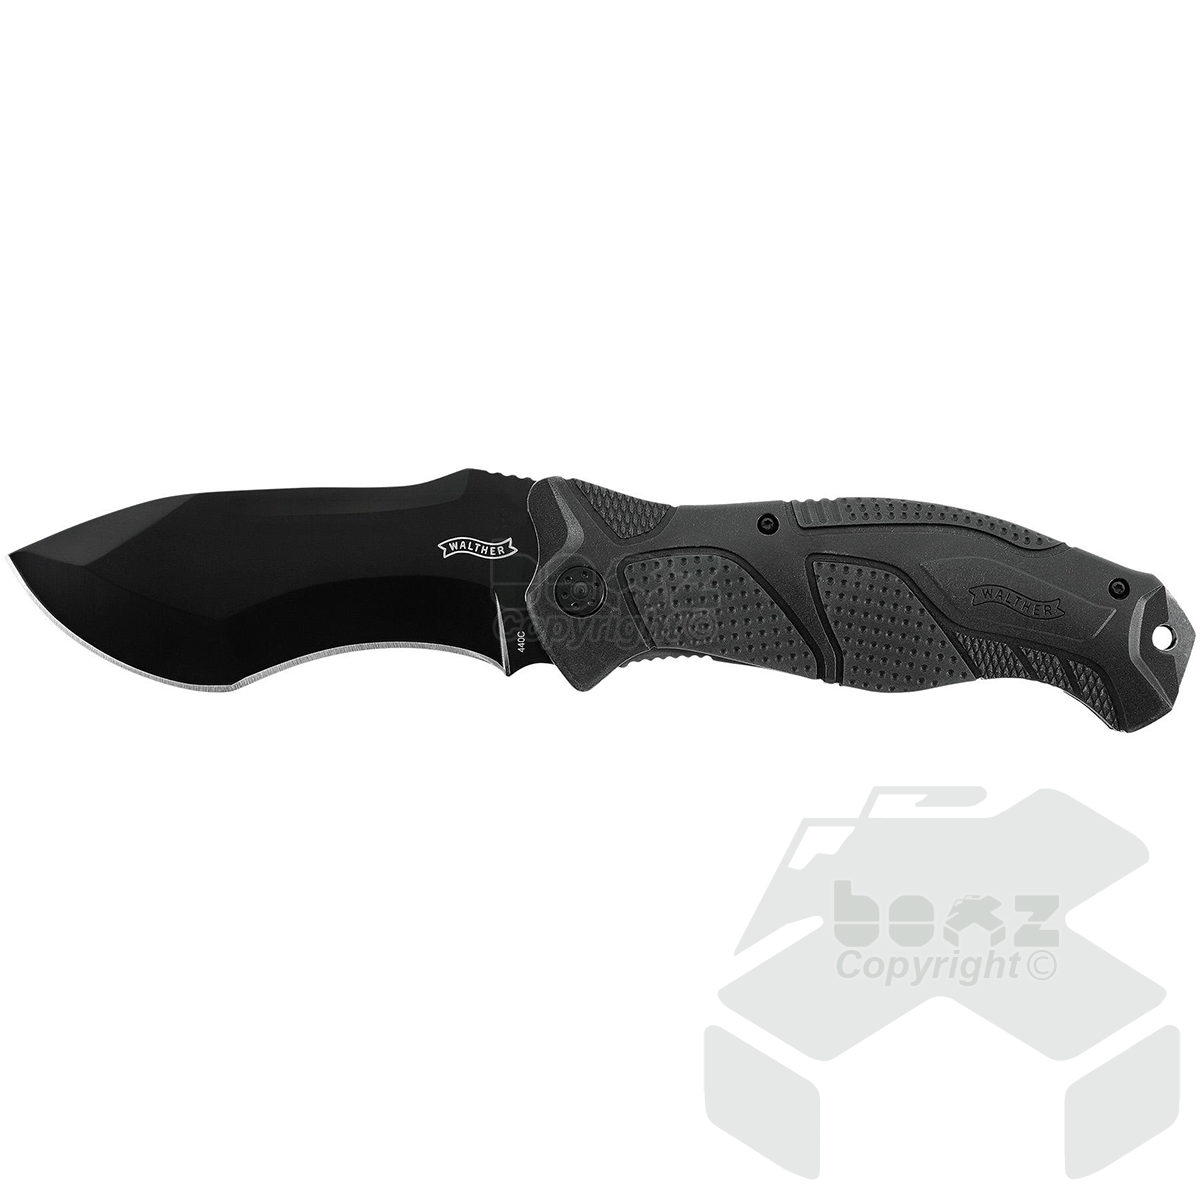 Walther OSK 2 II Outdoor survival knife